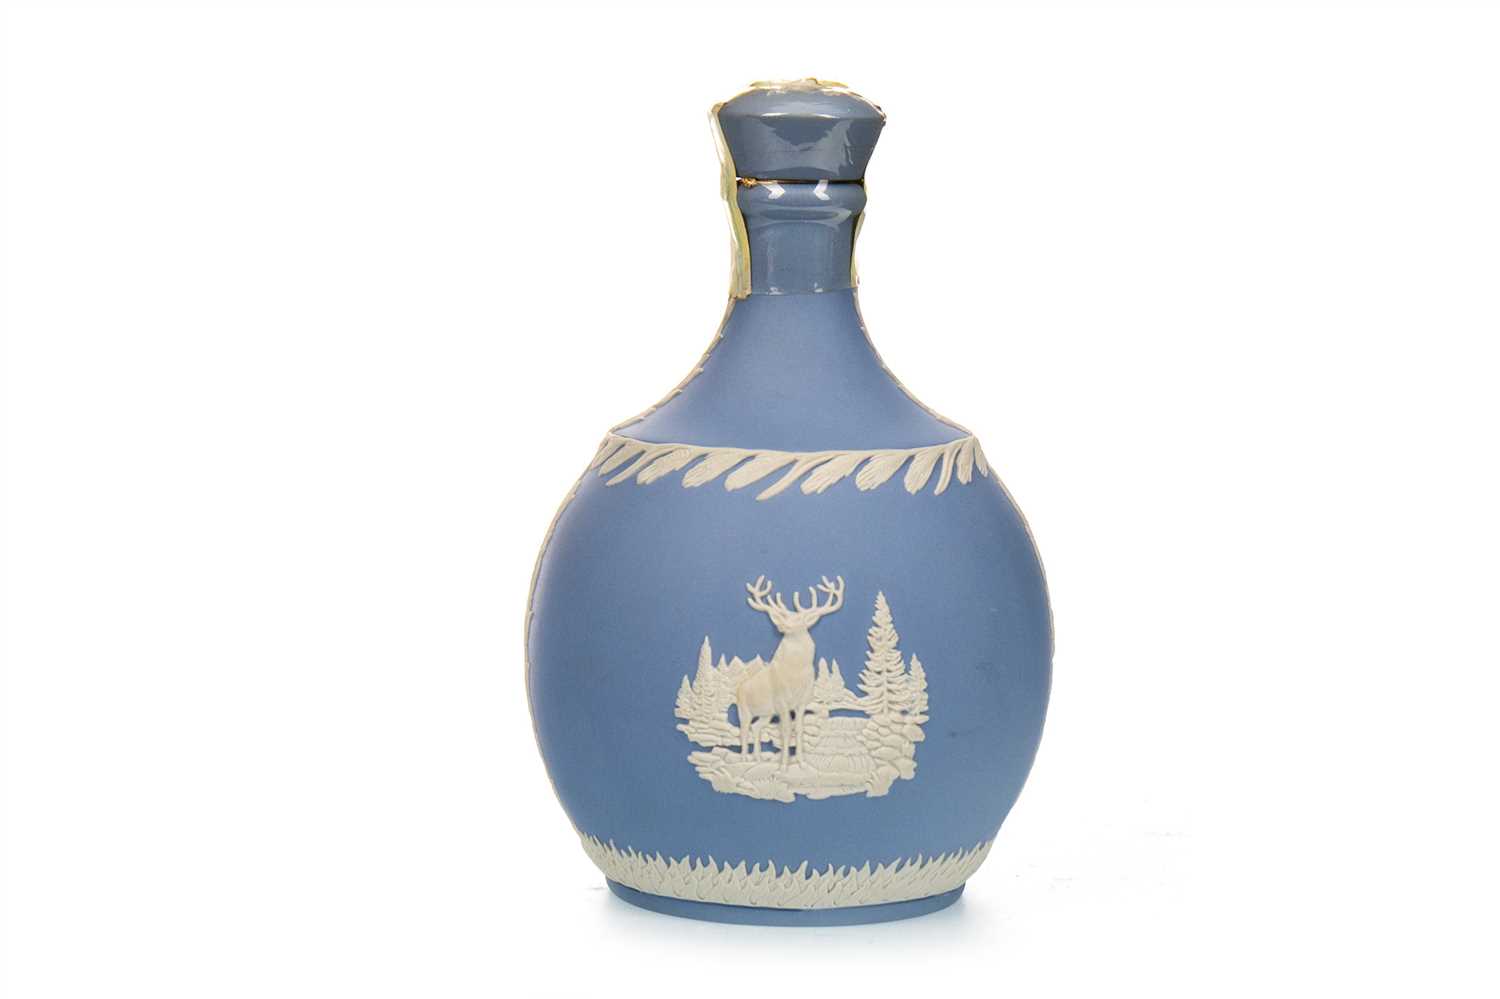 Lot 306 - GLENFIDDICH 21 YEARS OLD WEDGEWOOD DECANTER